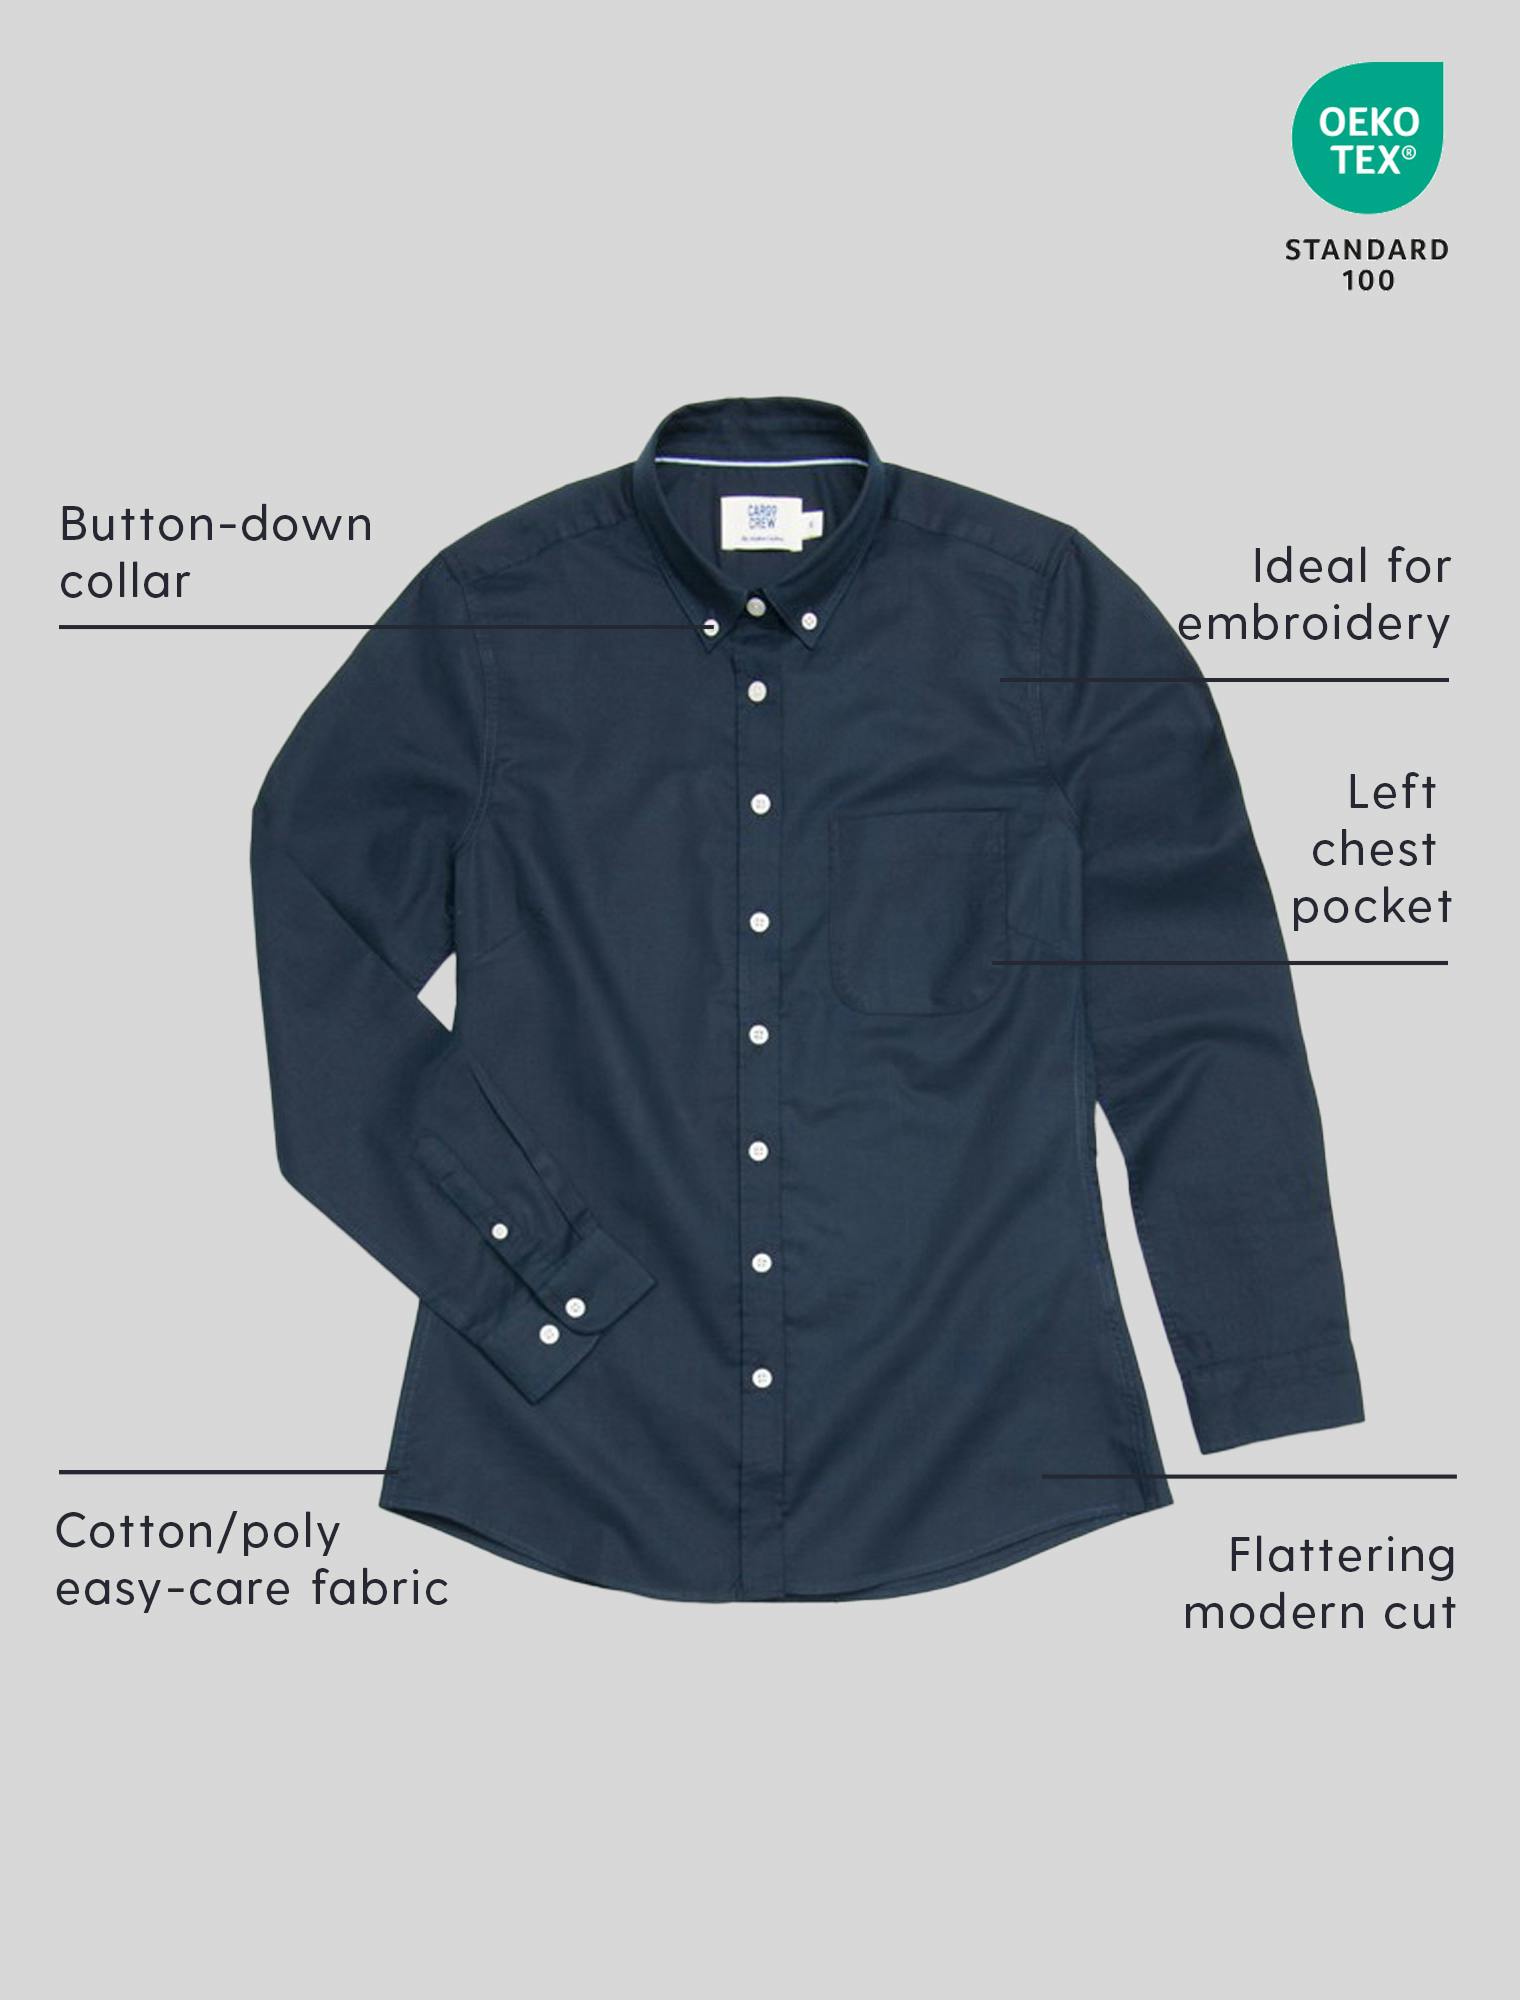 Men's Smith Long Sleeve Oxford Shirt - Navy Blue with White Buttons